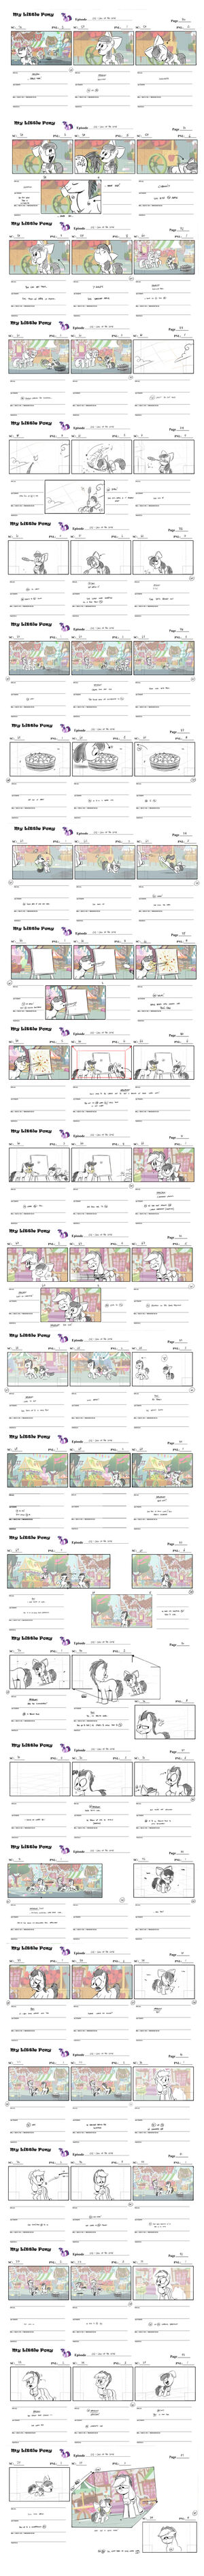 Call of the Cutie storyboard by Sabrina Alberghetti